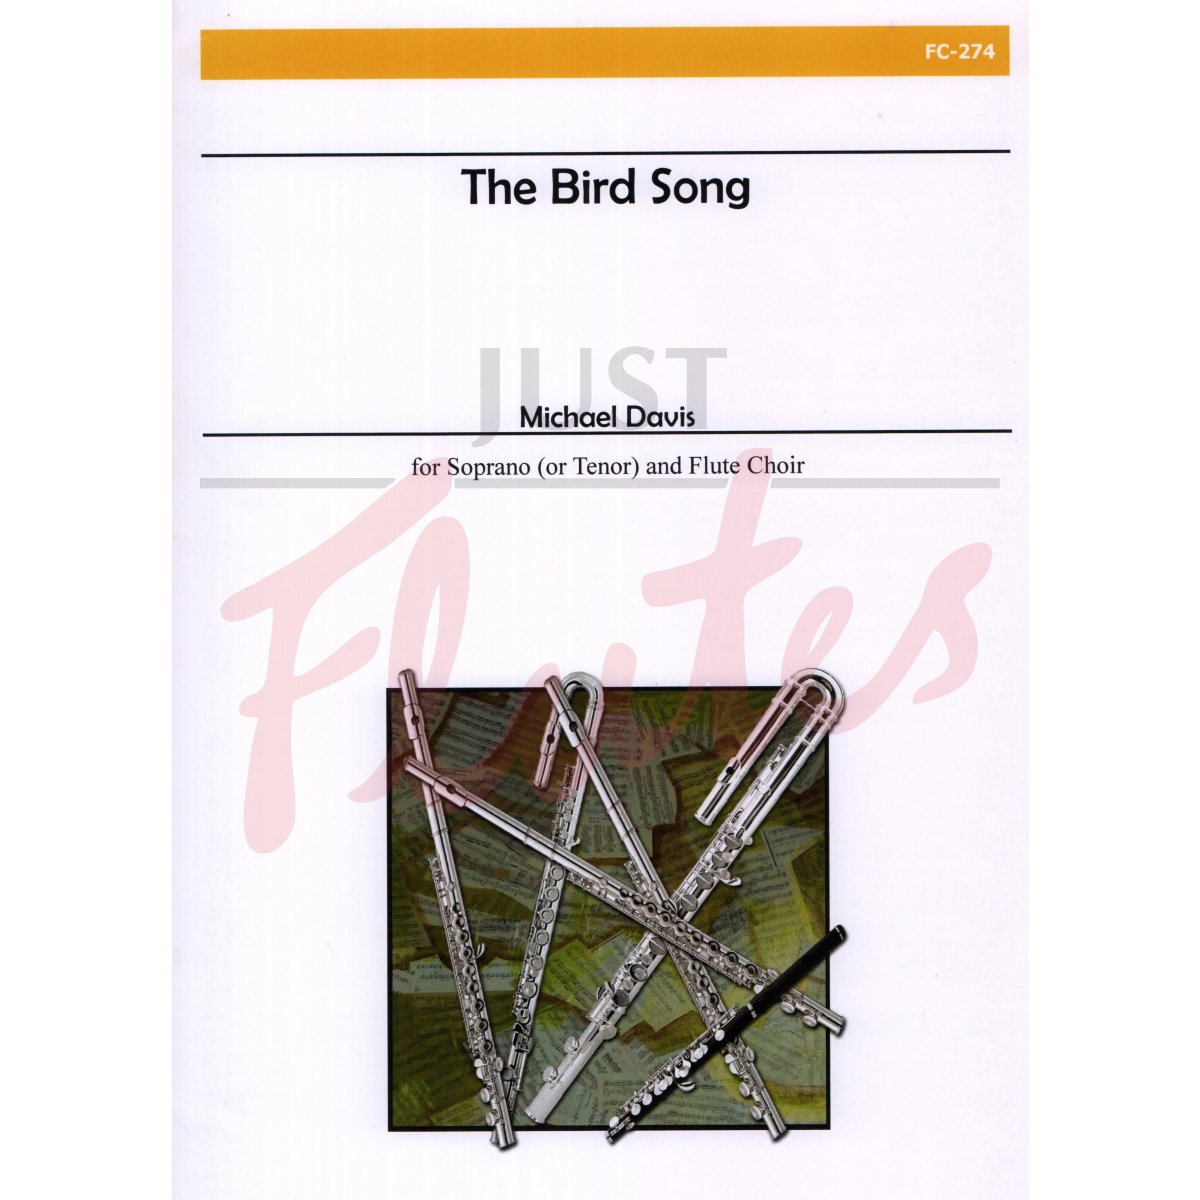 The Bird Song for Soprano or Tenor Voice and Flute Choir